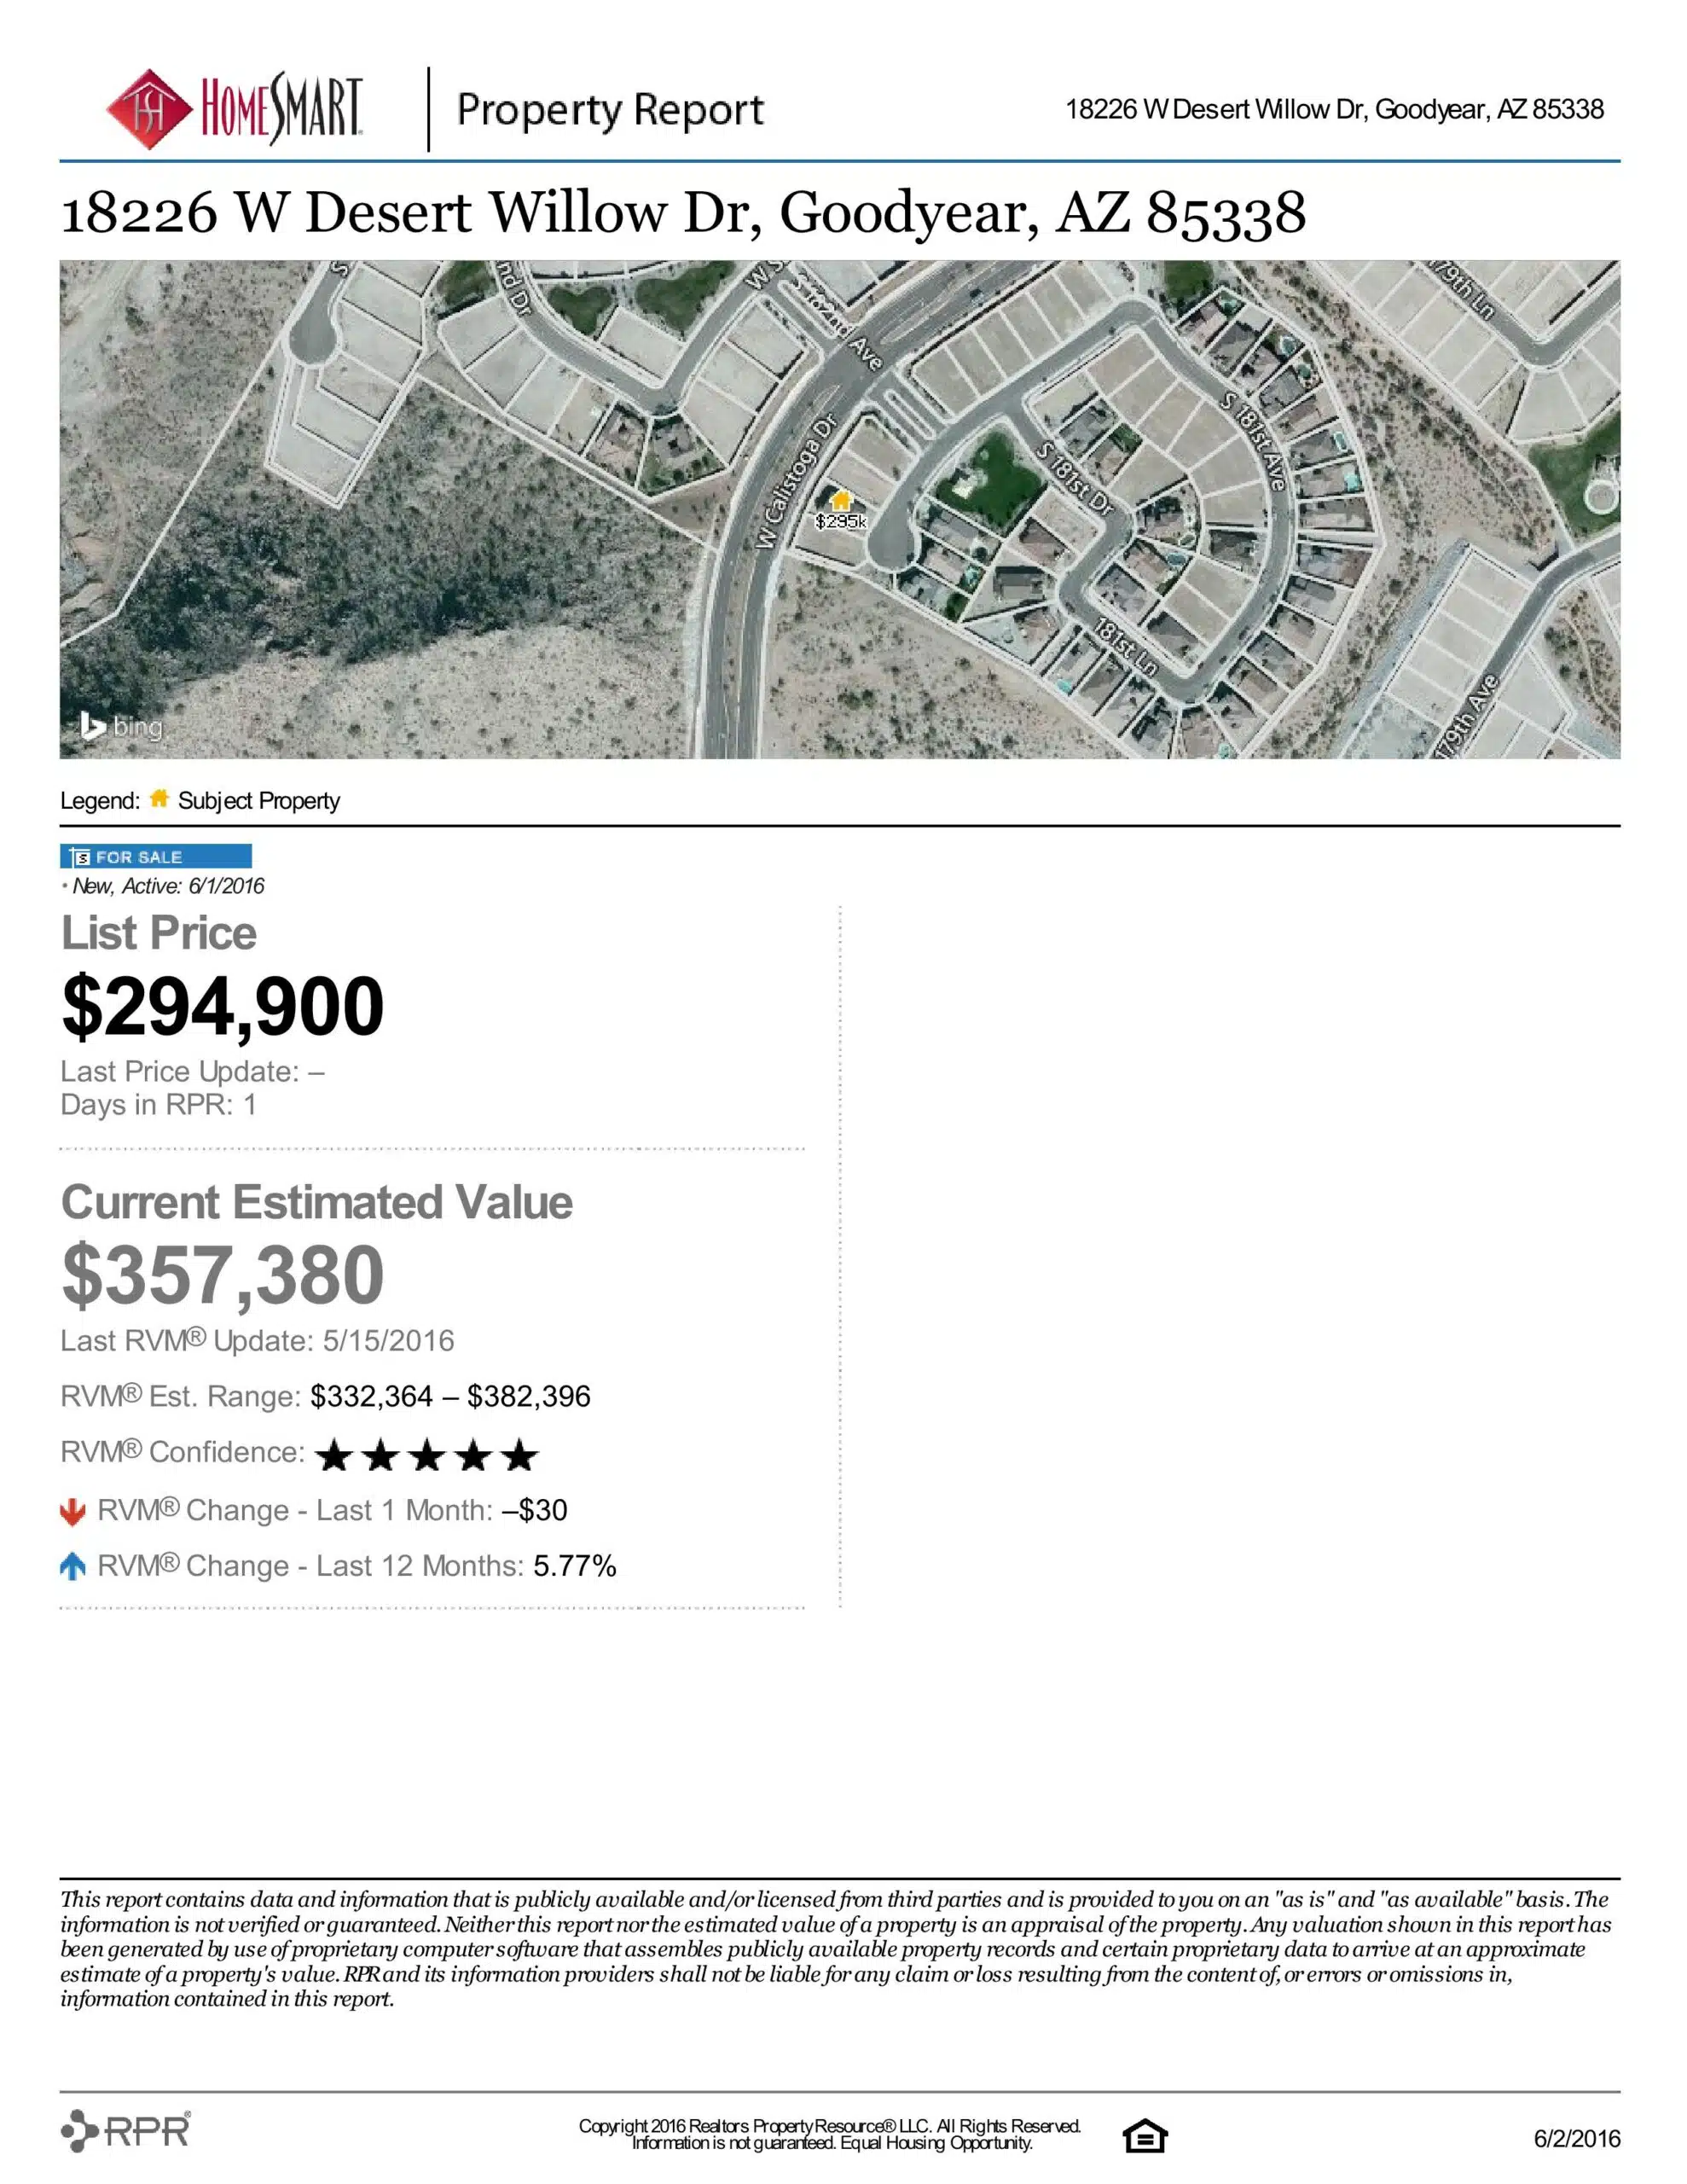 18226 W DESERT WILLOW DR PROPERTY REPORT-page-002